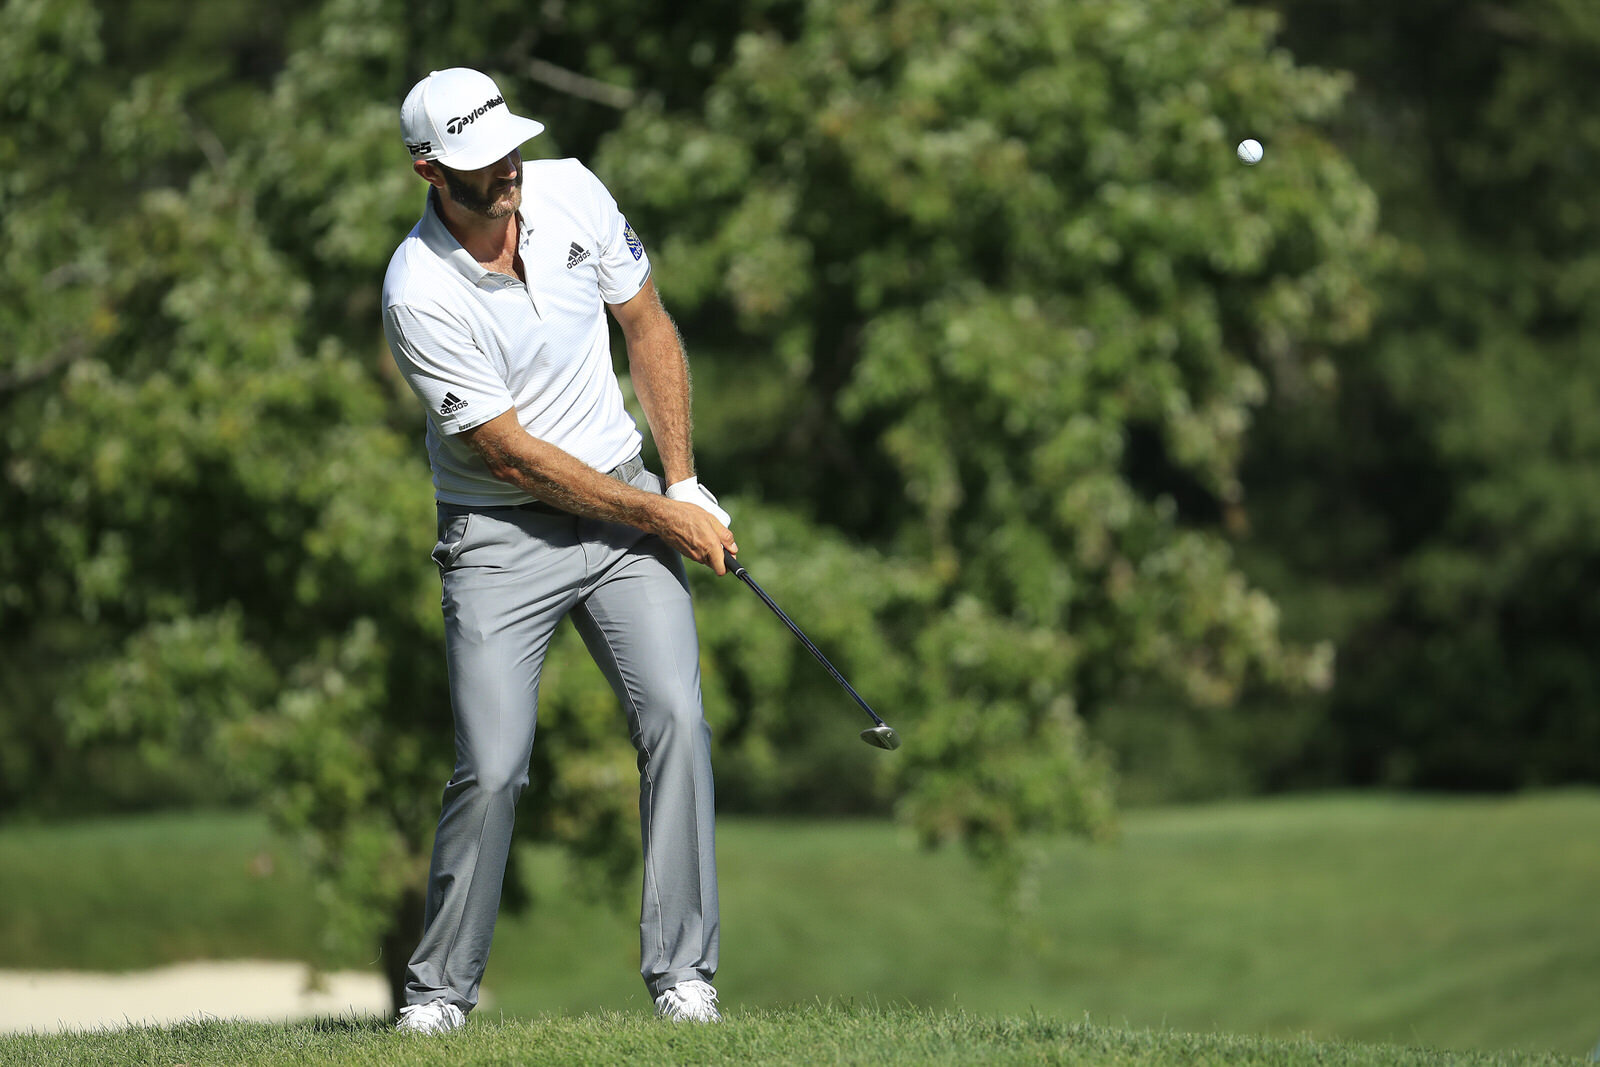  OLYMPIA FIELDS, ILLINOIS - AUGUST 27: Dustin Johnson of the United States plays a second shot on the sixth hole during the first round of the BMW Championship on the North Course at Olympia Fields Country Club on August 27, 2020 in Olympia Fields, I